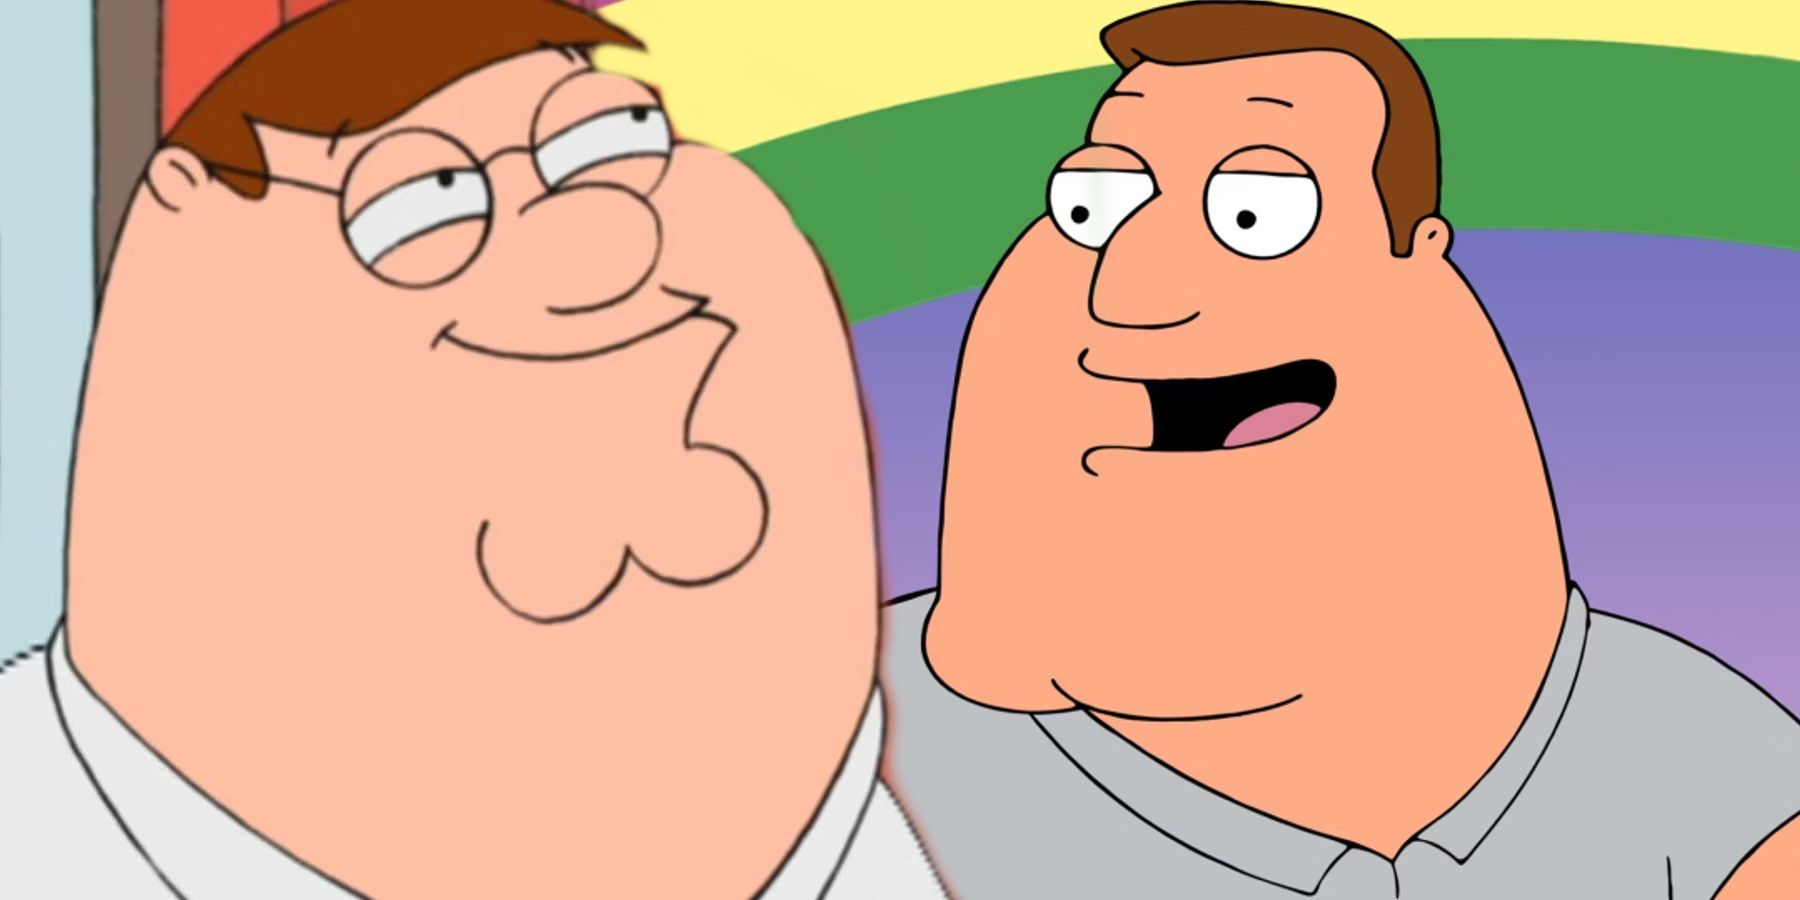 Peter Griffin looking smug next to Joe smiling in Family Guy